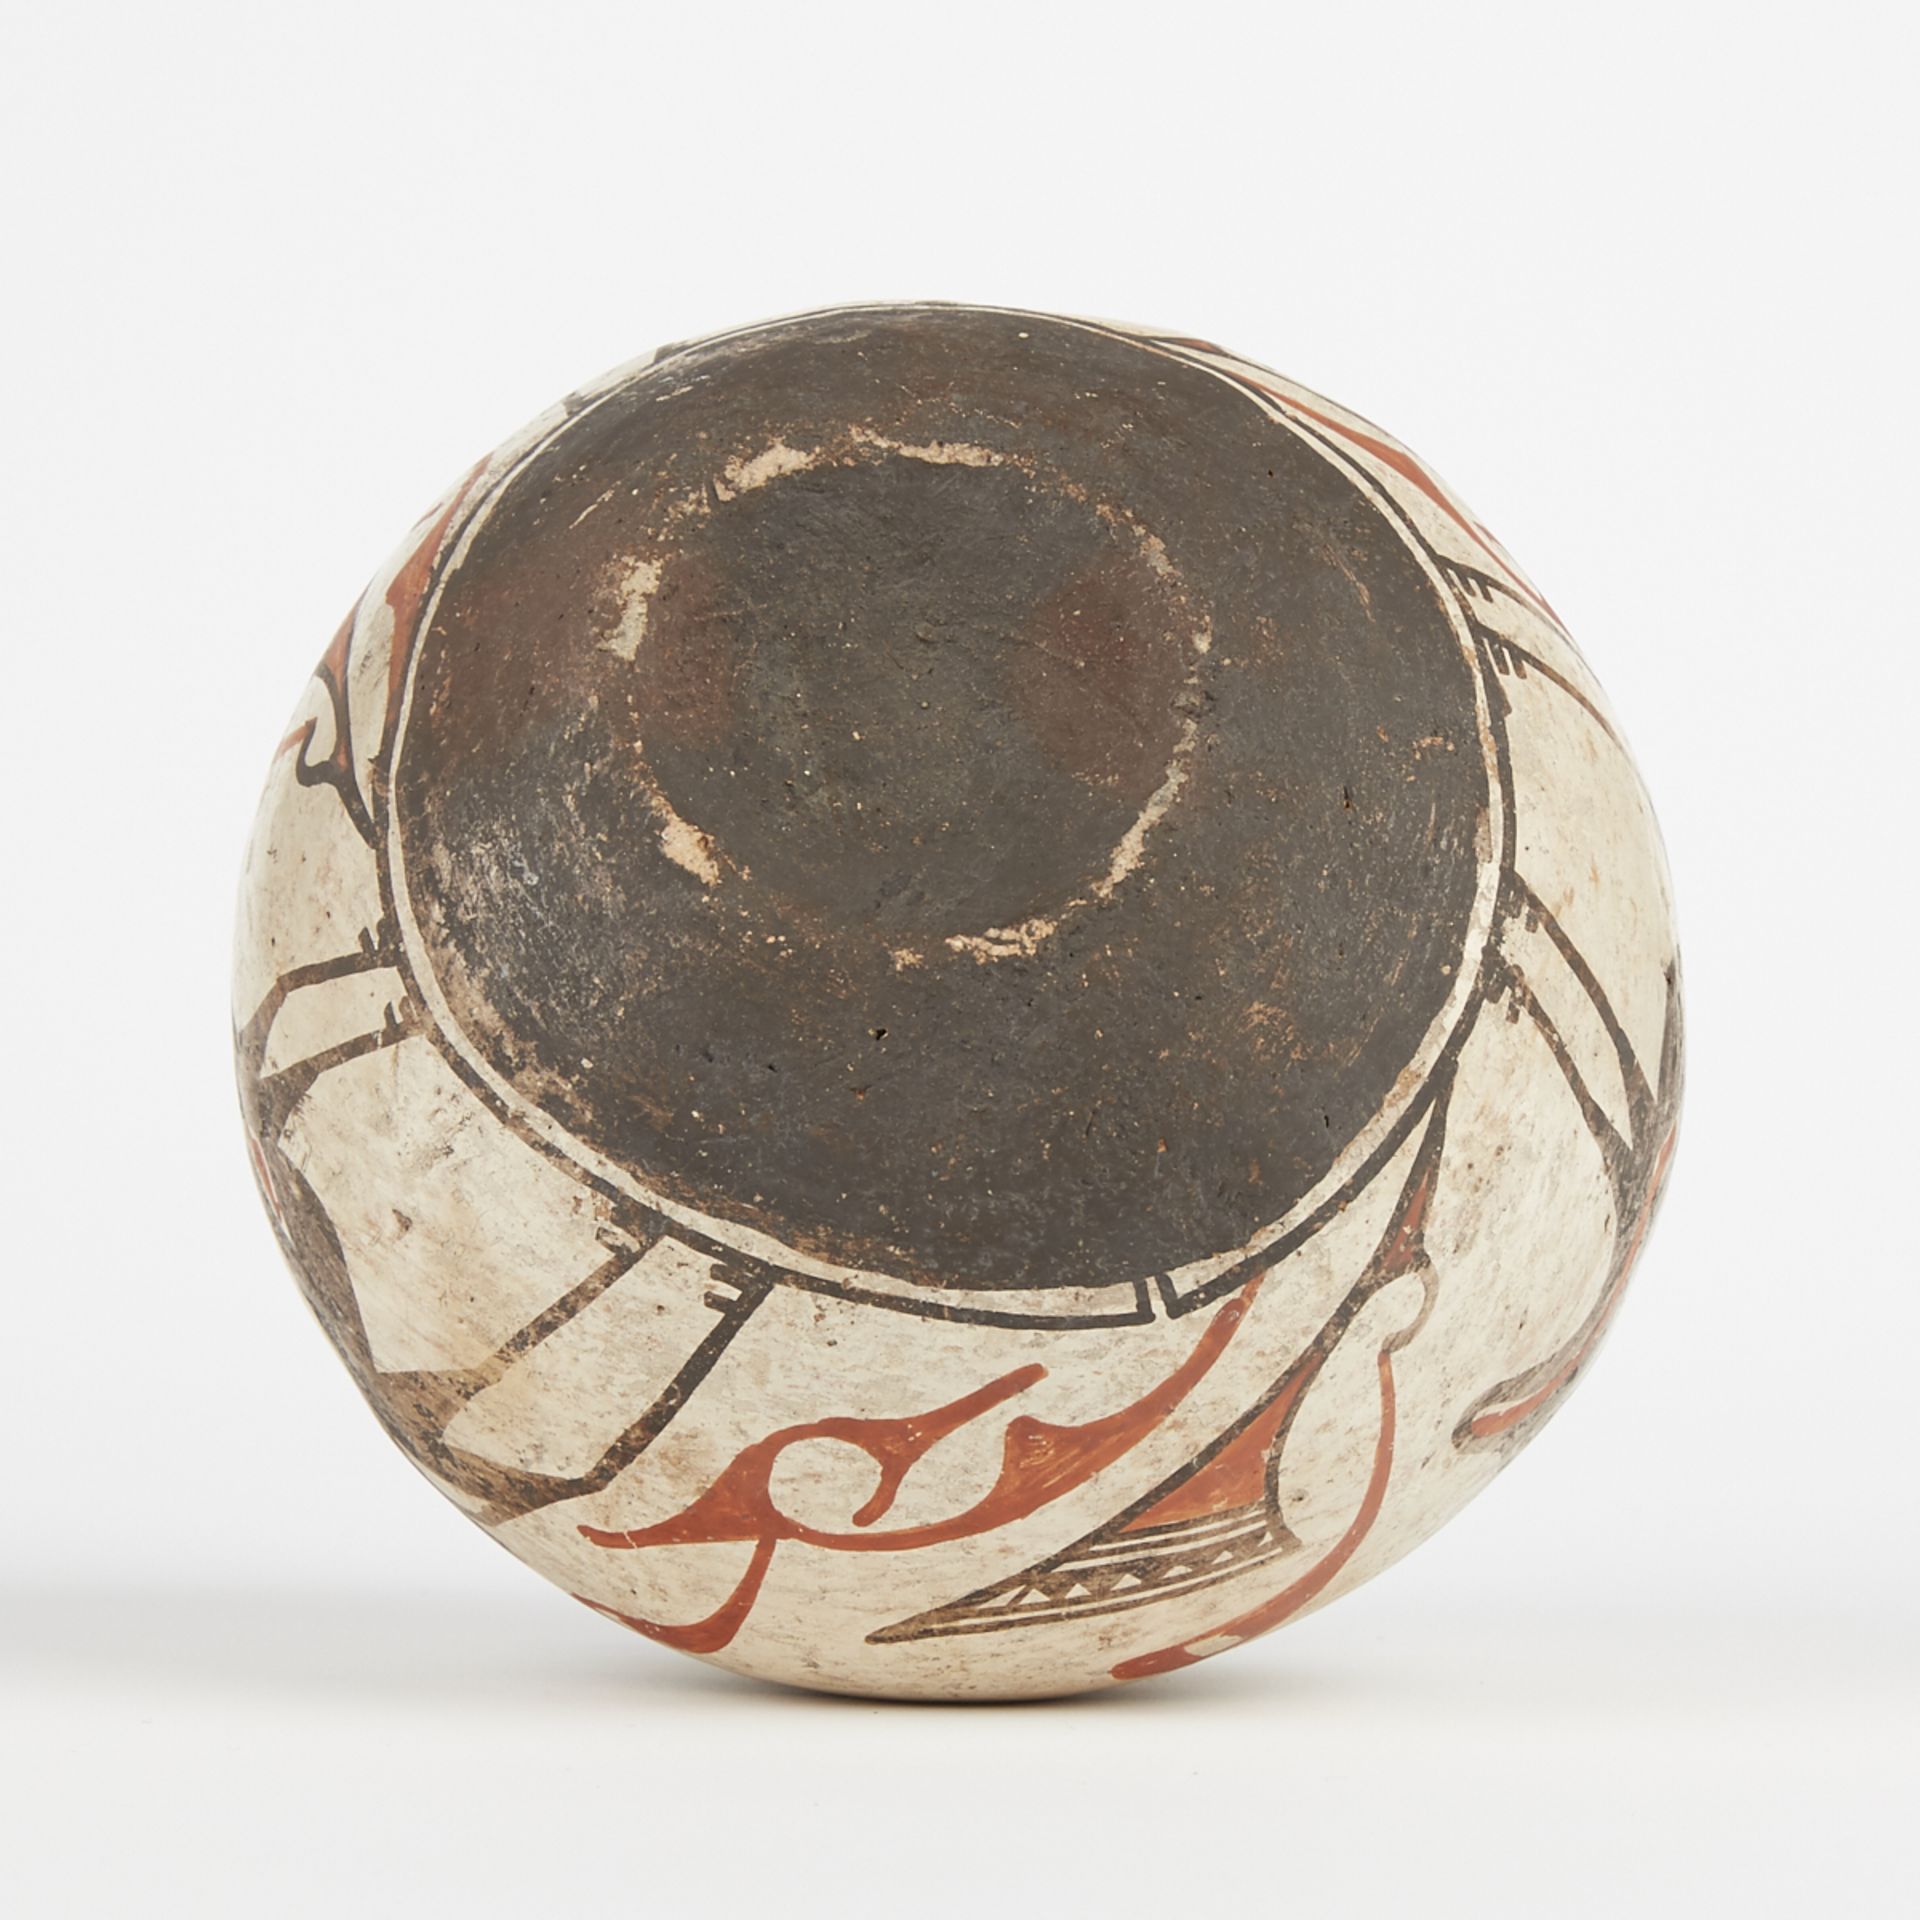 Early Zuni Pueblo Child's Olla Pottery Water Jar - Image 5 of 5